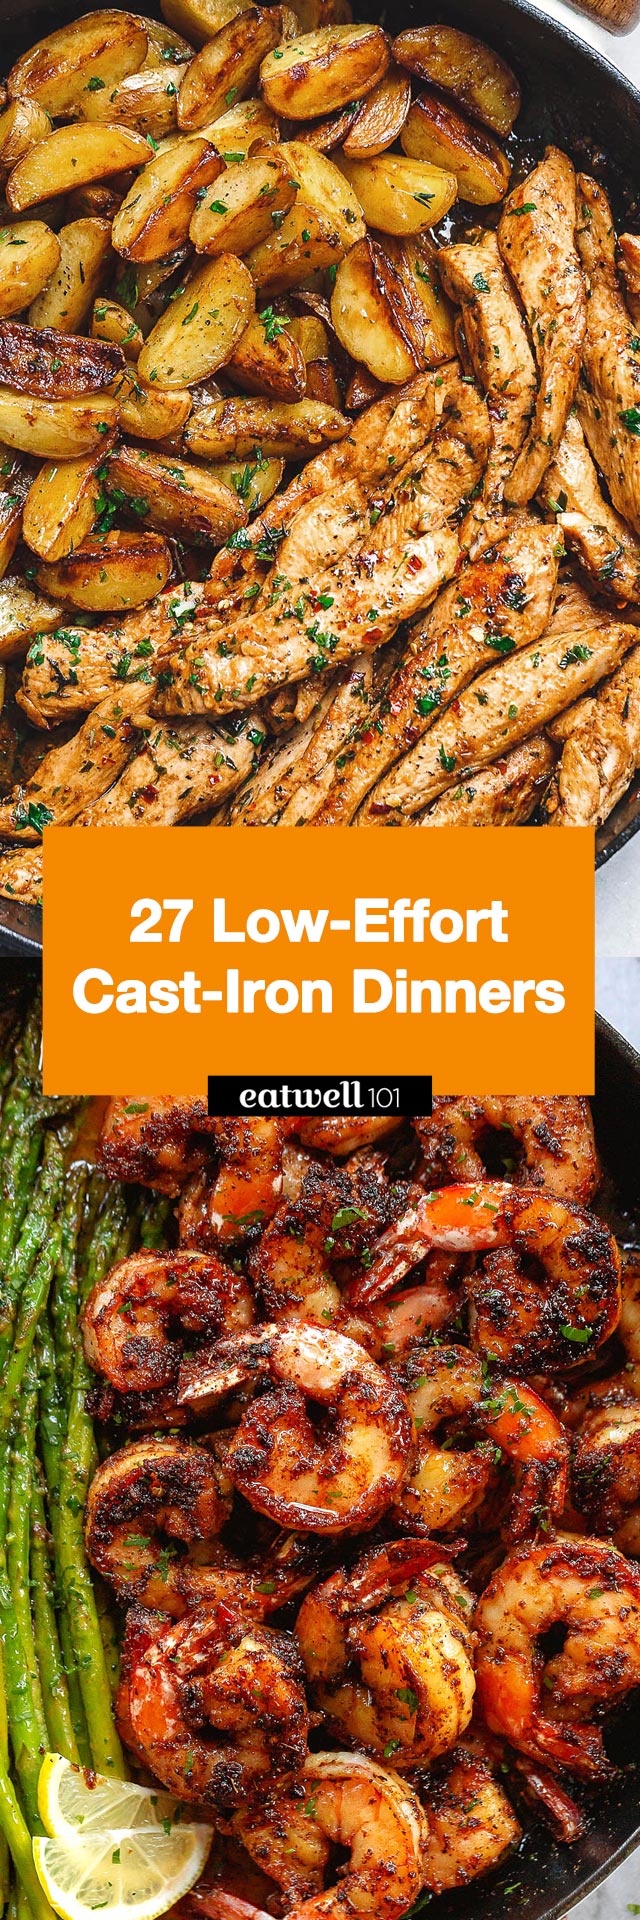 35 Best Cast-Iron Skillet Recipes — Eat This Not That